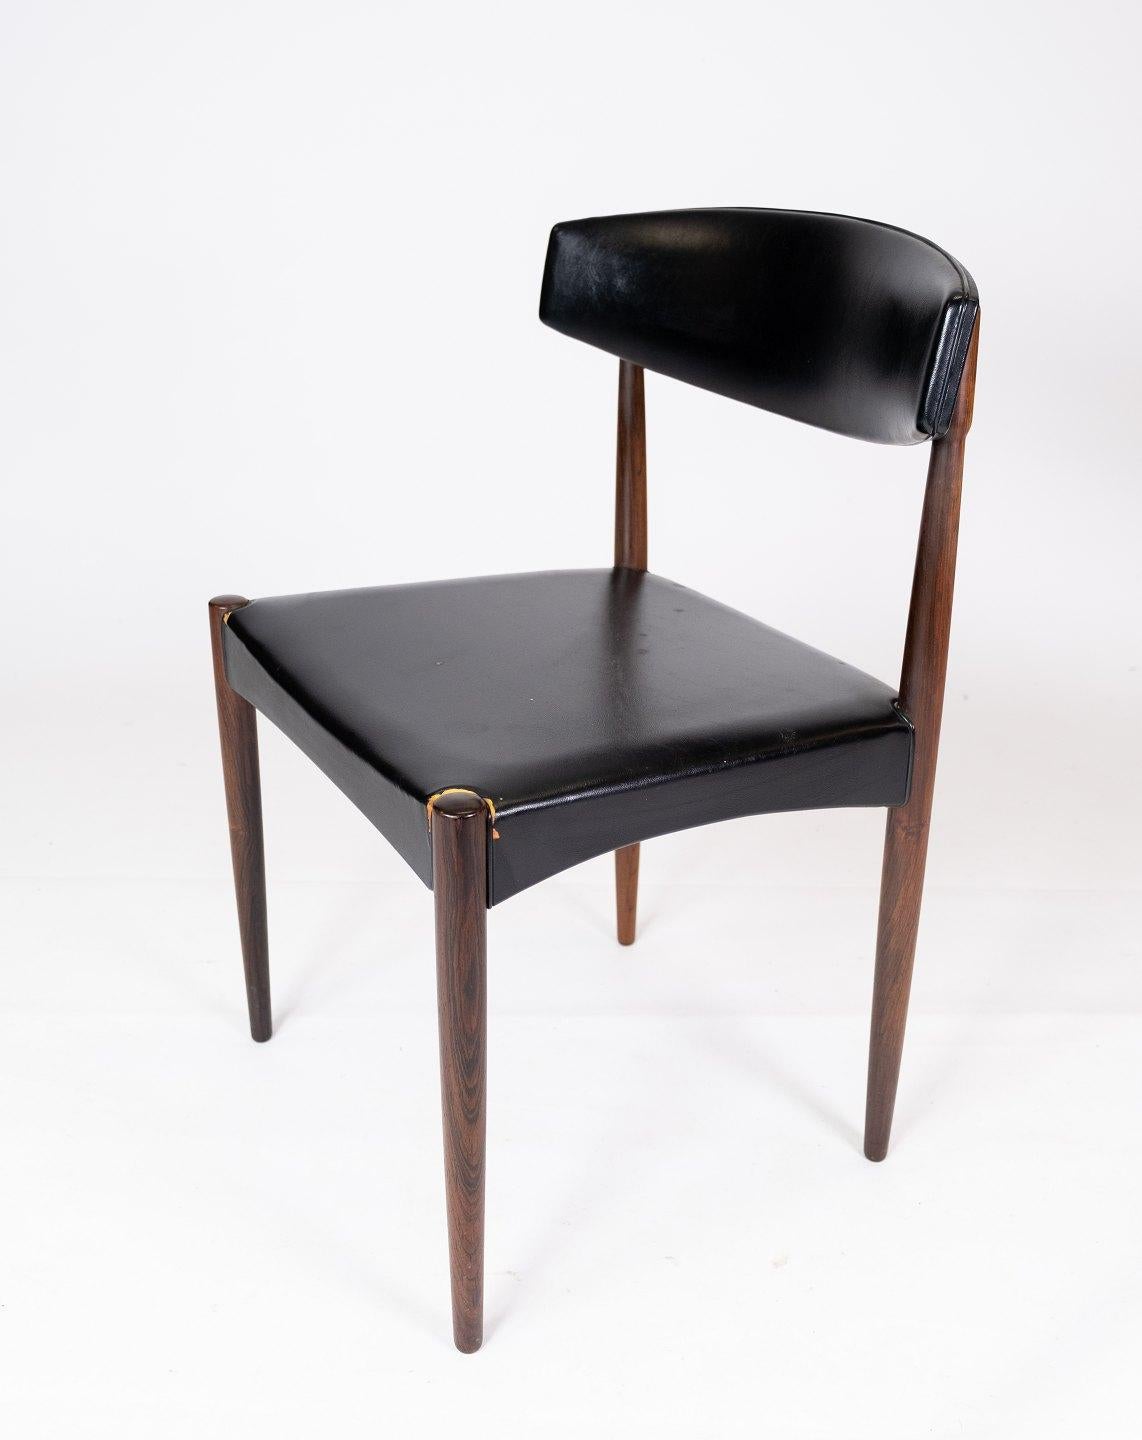 This set of four dining chairs is a beautiful example of Danish design from the 1960s. The chairs are made of rosewood, an exclusive wood known for its rich color and beautiful grain.

The elegant design combined with the luxurious black leather